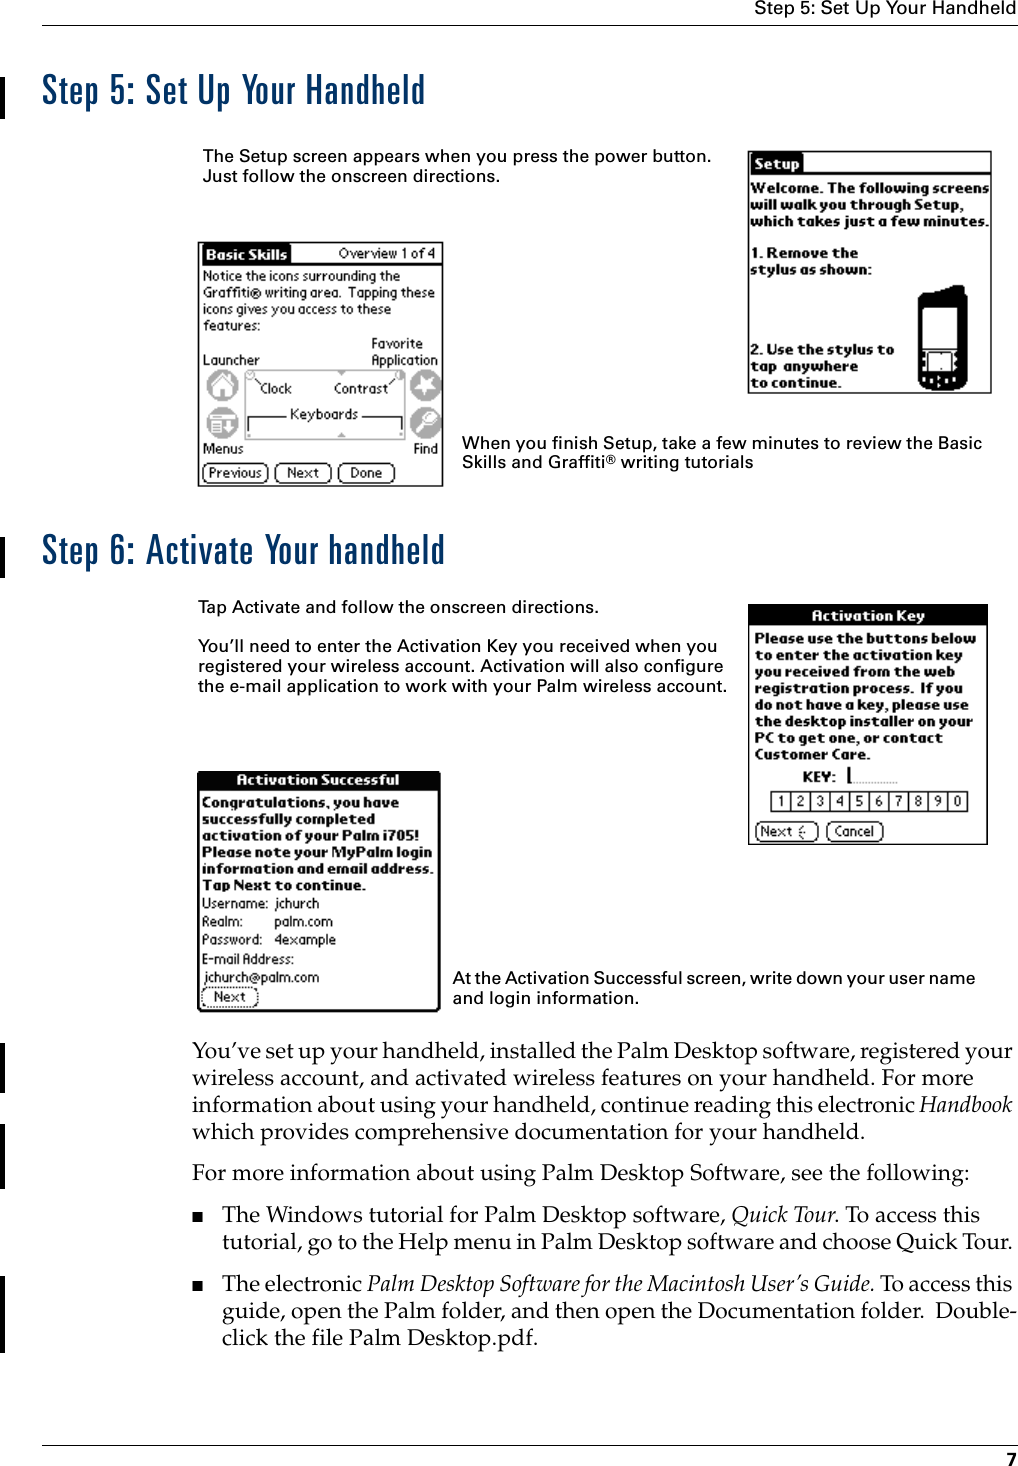 Step 5: Set Up Your Handheld7Step 5: Set Up Your HandheldStep 6: Activate Your handheldYou’ve set up your handheld, installed the Palm Desktop software, registered your wireless account, and activated wireless features on your handheld. For more information about using your handheld, continue reading this electronic Handbook which provides comprehensive documentation for your handheld.For more information about using Palm Desktop Software, see the following:■The Windows tutorial for Palm Desktop software, Quick Tour. To access this tutorial, go to the Help menu in Palm Desktop software and choose Quick Tour. ■The electronic Palm Desktop Software for the Macintosh User’s Guide. To access this guide, open the Palm folder, and then open the Documentation folder.  Double-click the file Palm Desktop.pdf.  The Setup screen appears when you press the power button. Just follow the onscreen directions.When you finish Setup, take a few minutes to review the Basic Skills and Graffiti® writing tutorialsTap Activate and follow the onscreen directions. You’ll need to enter the Activation Key you received when you registered your wireless account. Activation will also configure the e-mail application to work with your Palm wireless account. At the Activation Successful screen, write down your user name and login information.